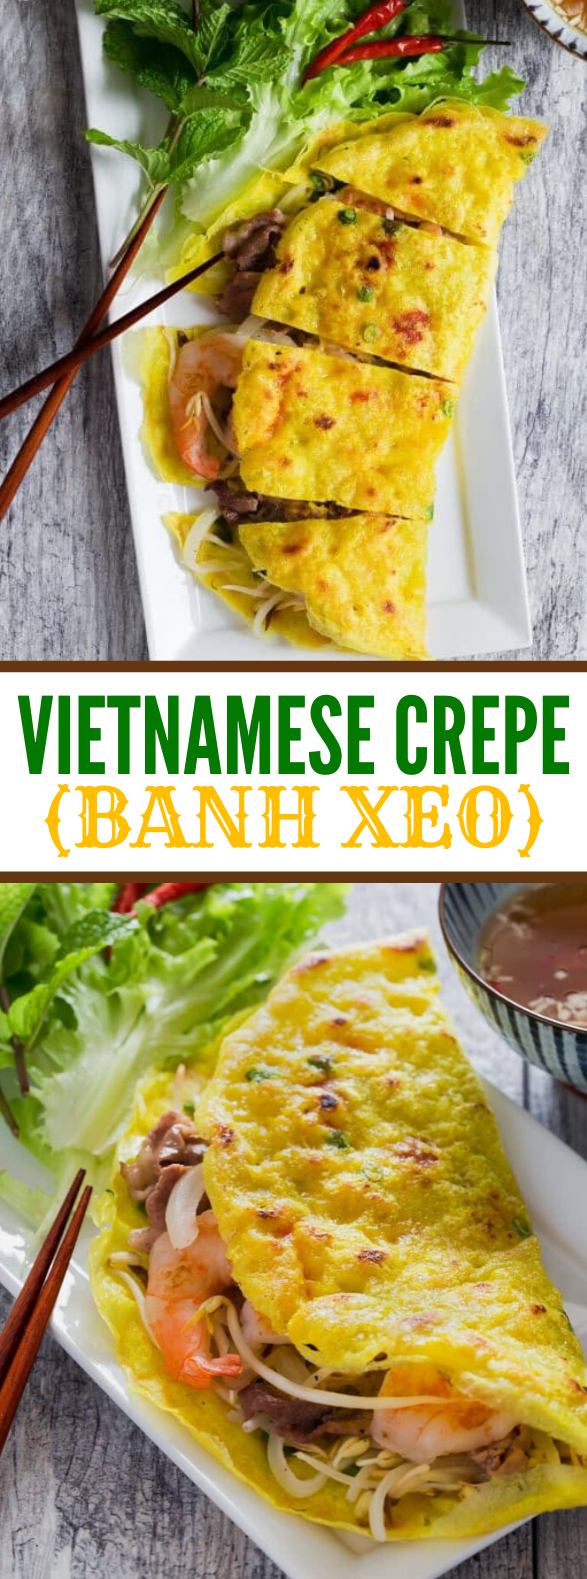 SIZZLING VIETNAMESE CREPE (BANH XEO) #appetizers #vegetables